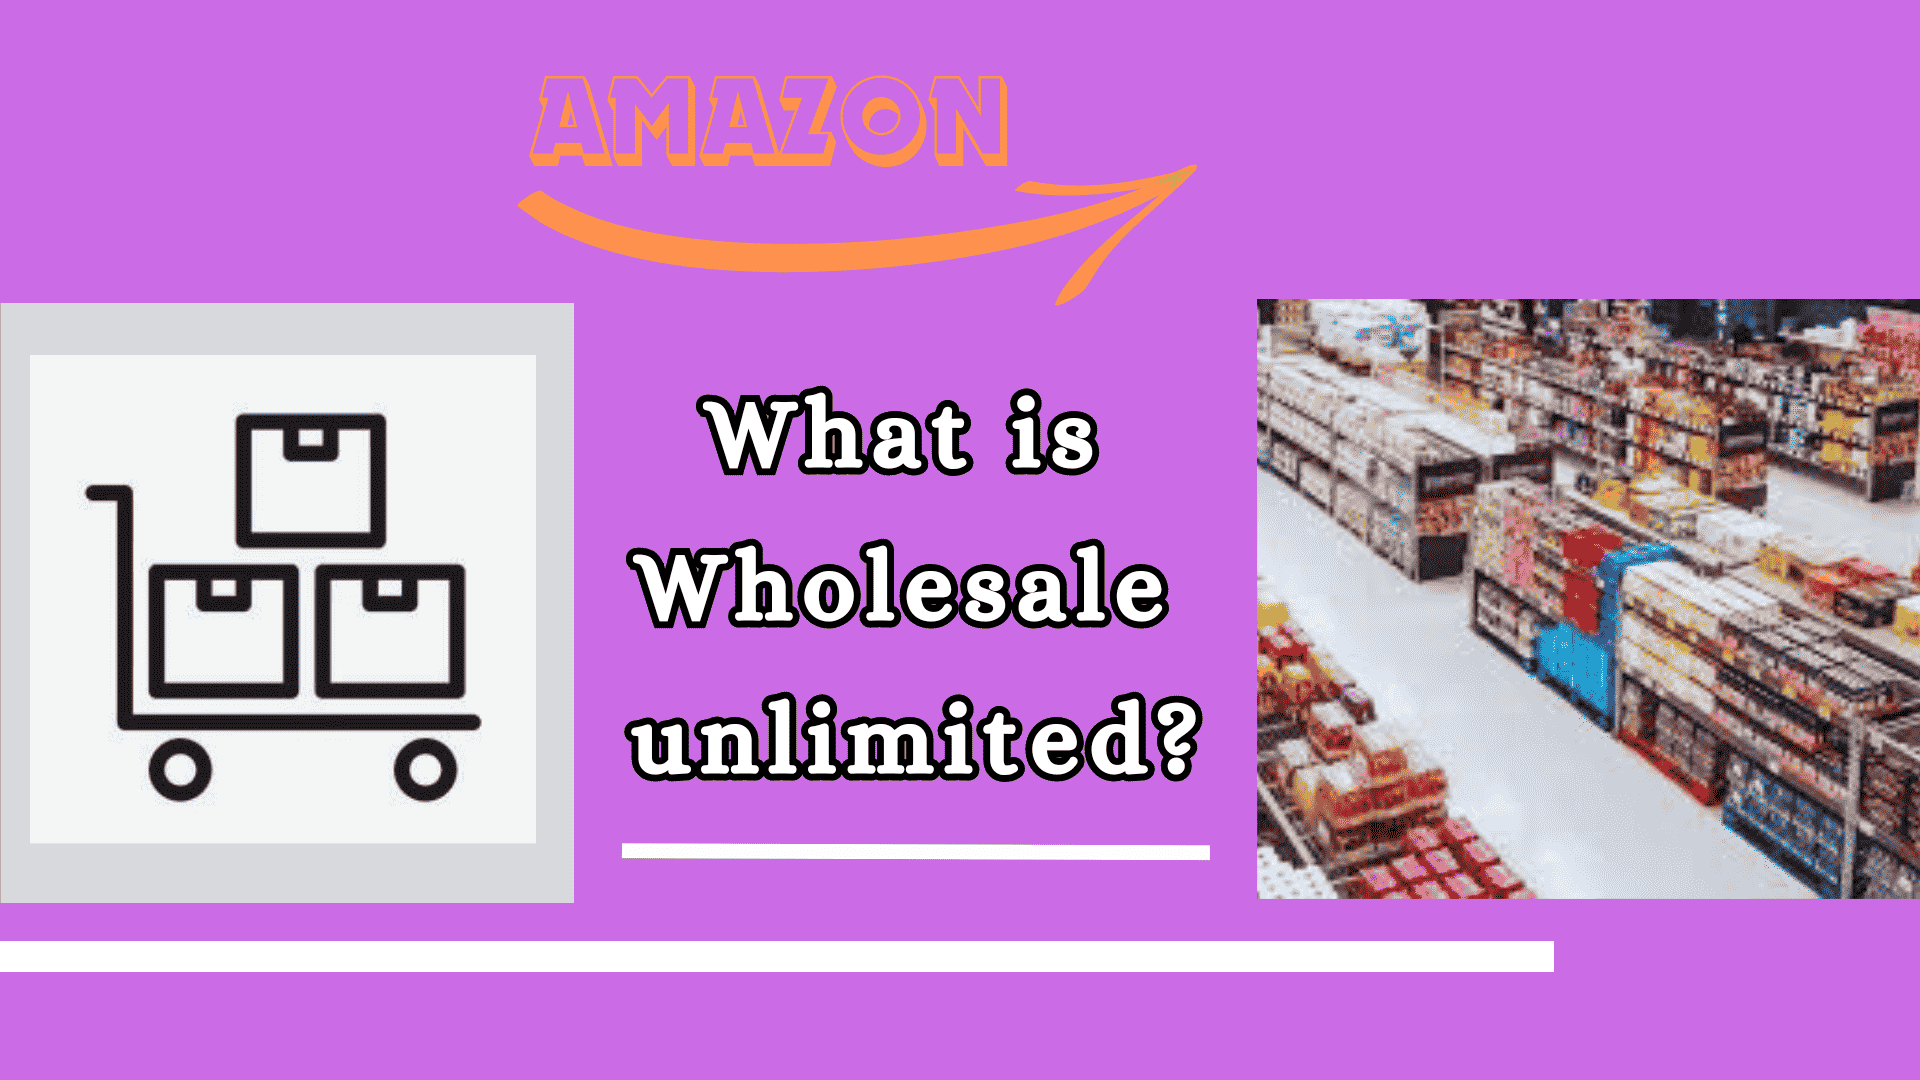 What is Wholesale unlimited